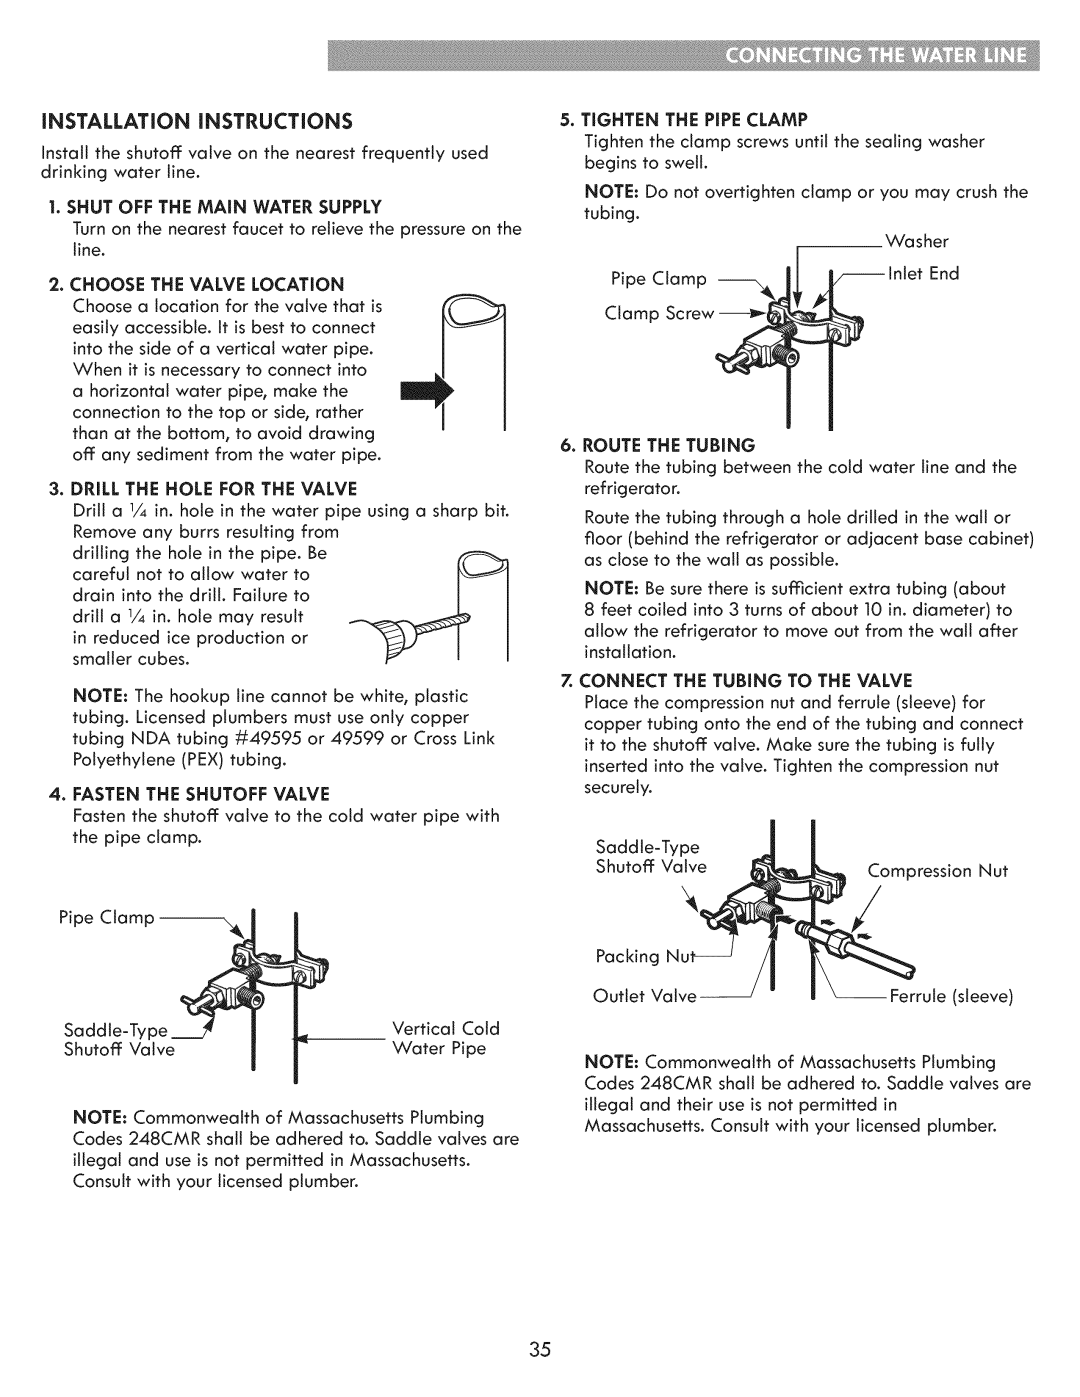 Kenmore 795.7103 manual iNSTALLATiON iNSTRUCTiONS, Shut Off The Main Water Supply, Drill The Hole For The Valve, inlet End 